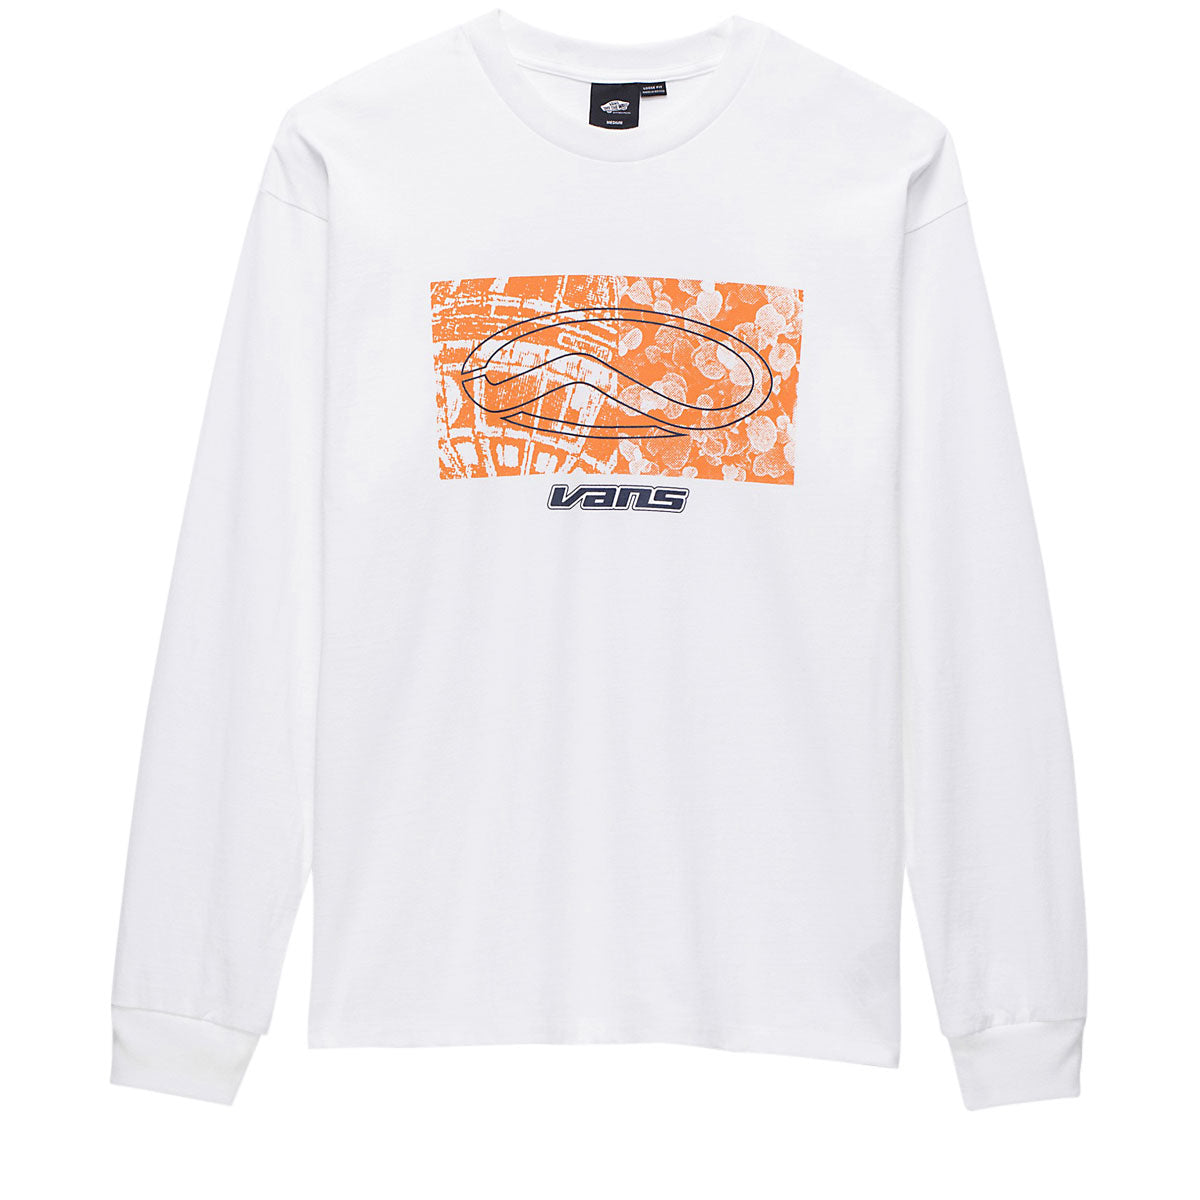 Vans Off The Wall II Loose Skate Classics Long Sleeve T-Shirt - White image 1